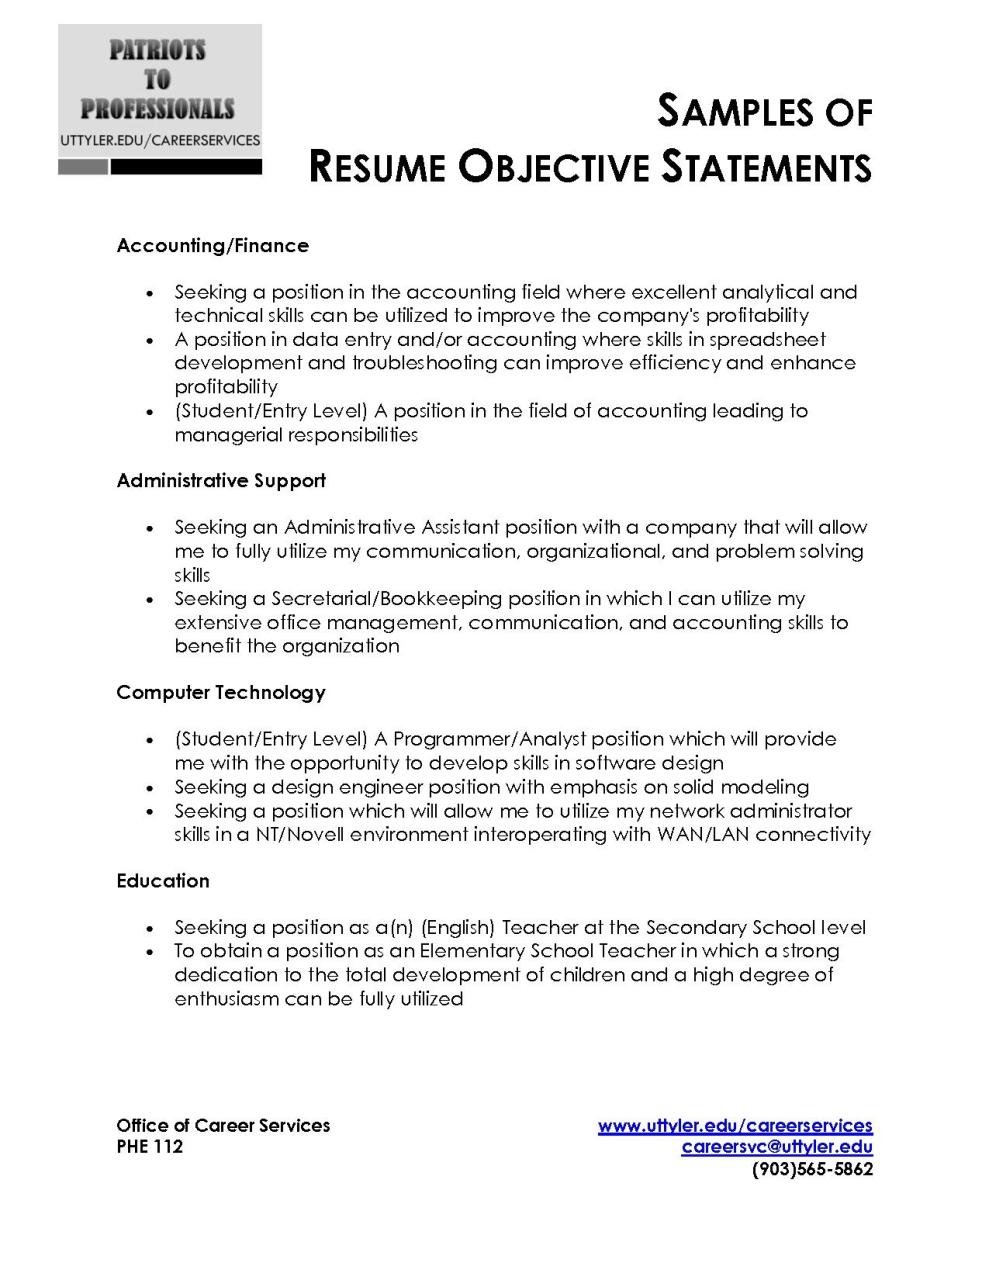 What Is The Best Objective Statement For A Resume